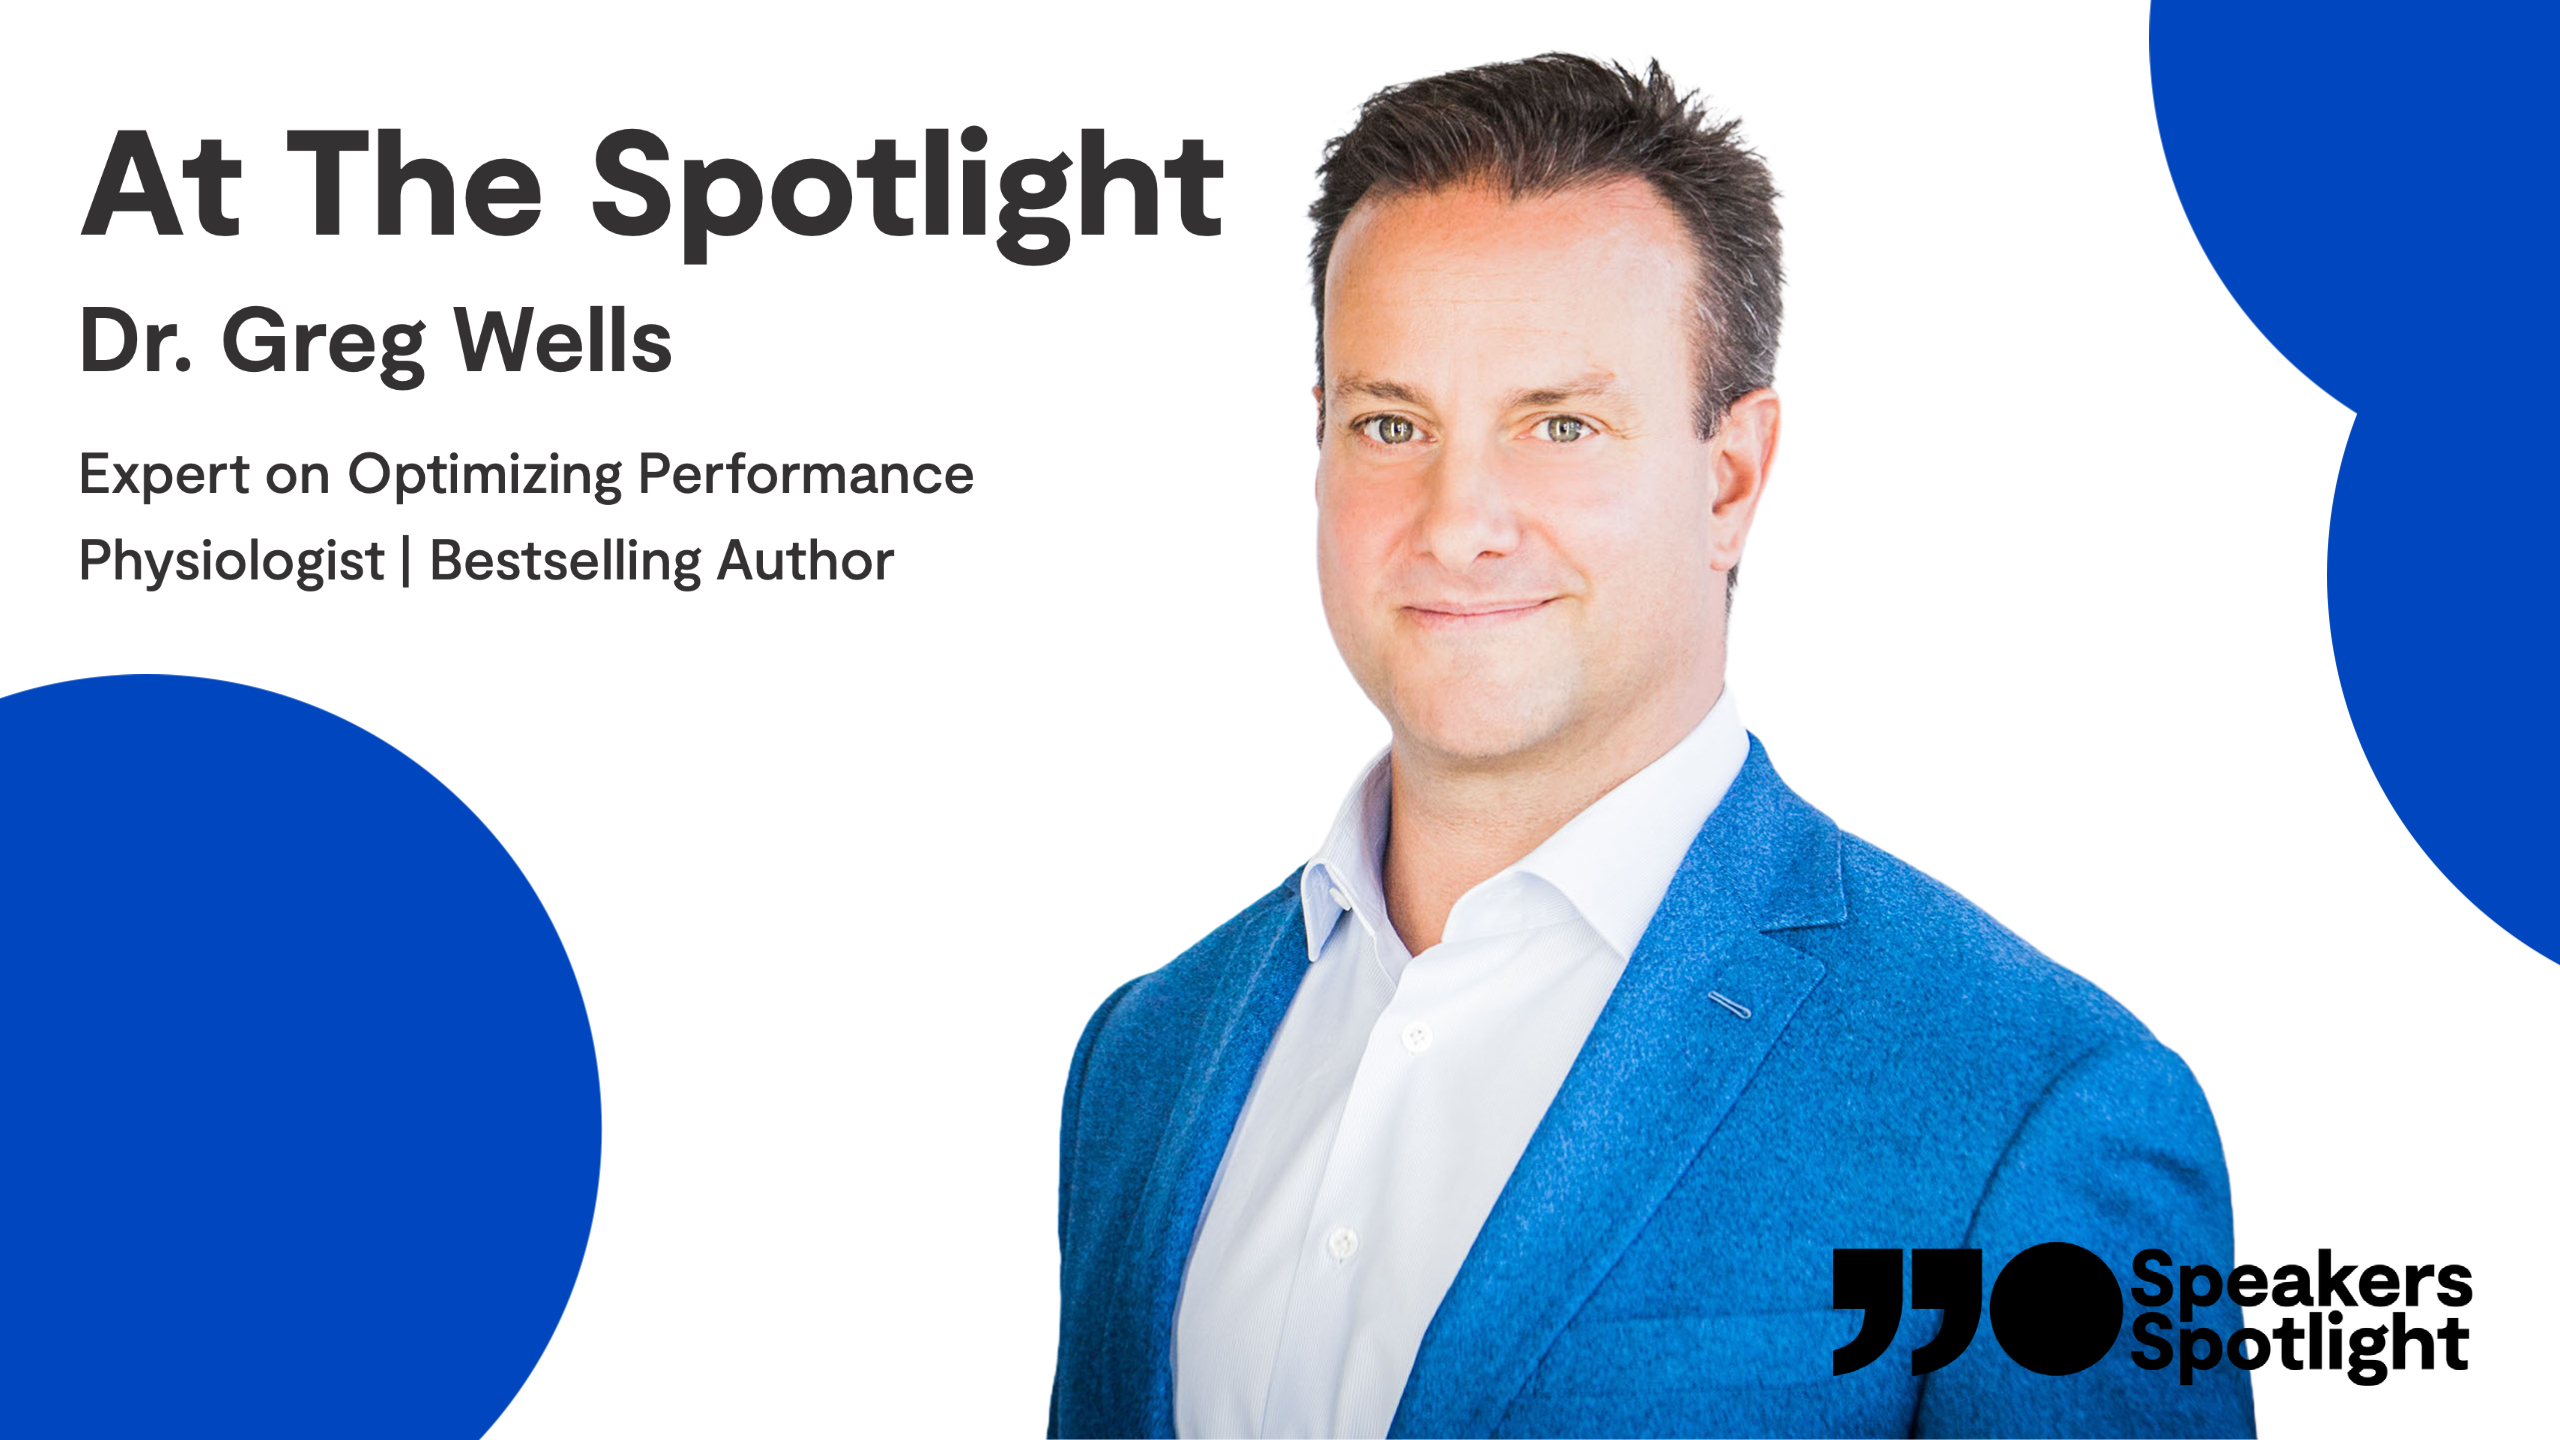 At The Spotlight with Dr. Greg Wells